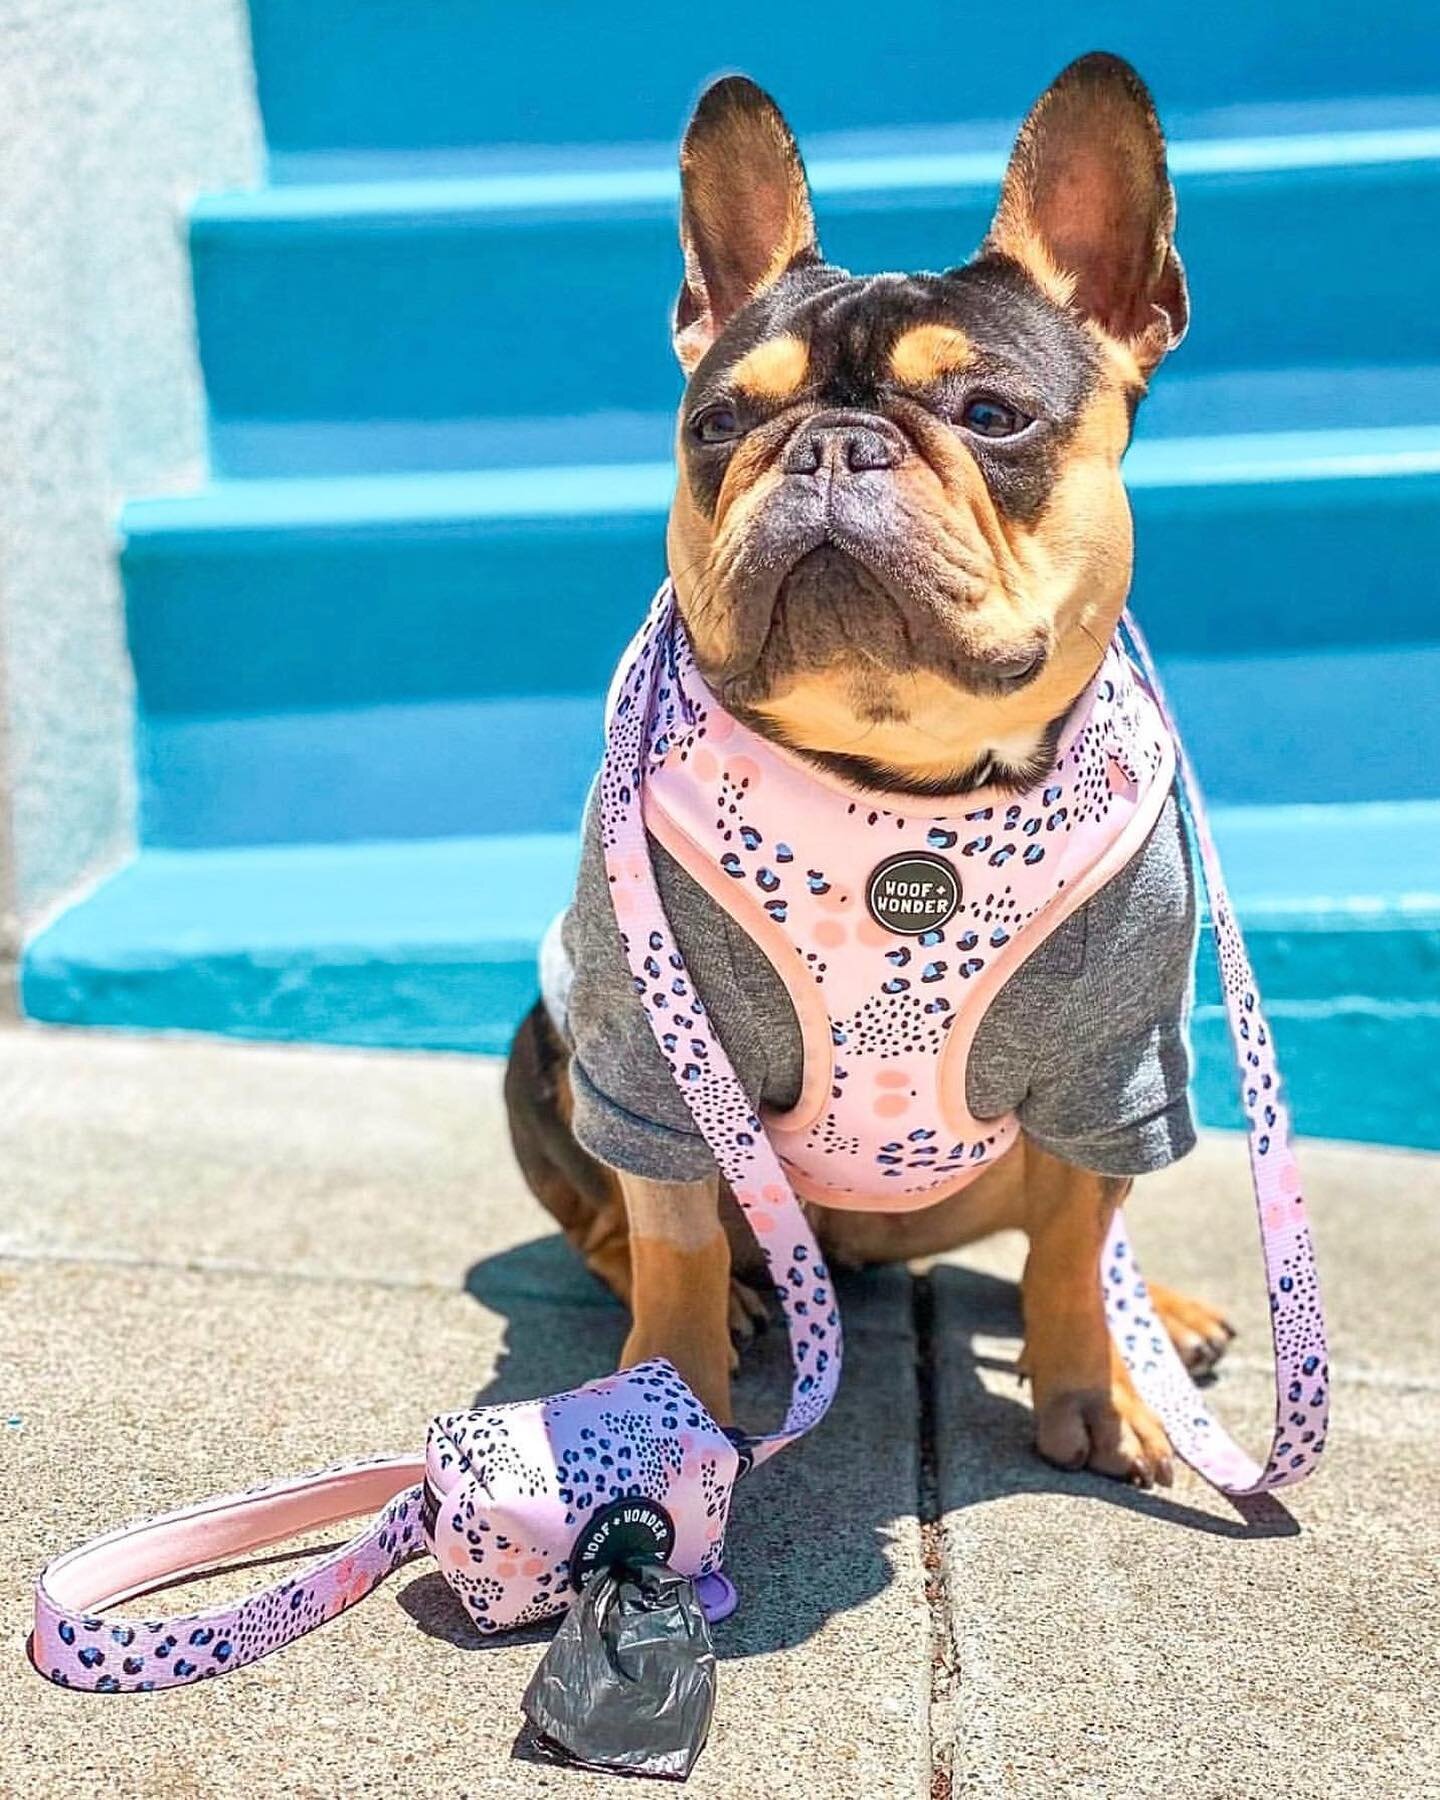 ✔️Eyebrows on point 
✔️Pink leopard print look on point 

Our @woofandwonder spotted in the city harness will be up on our website tomorrow! ✨

Watch this space with @_talathefrenchie 

#leopardprinteverything #prettyinpink #leopardprint #adjustableh